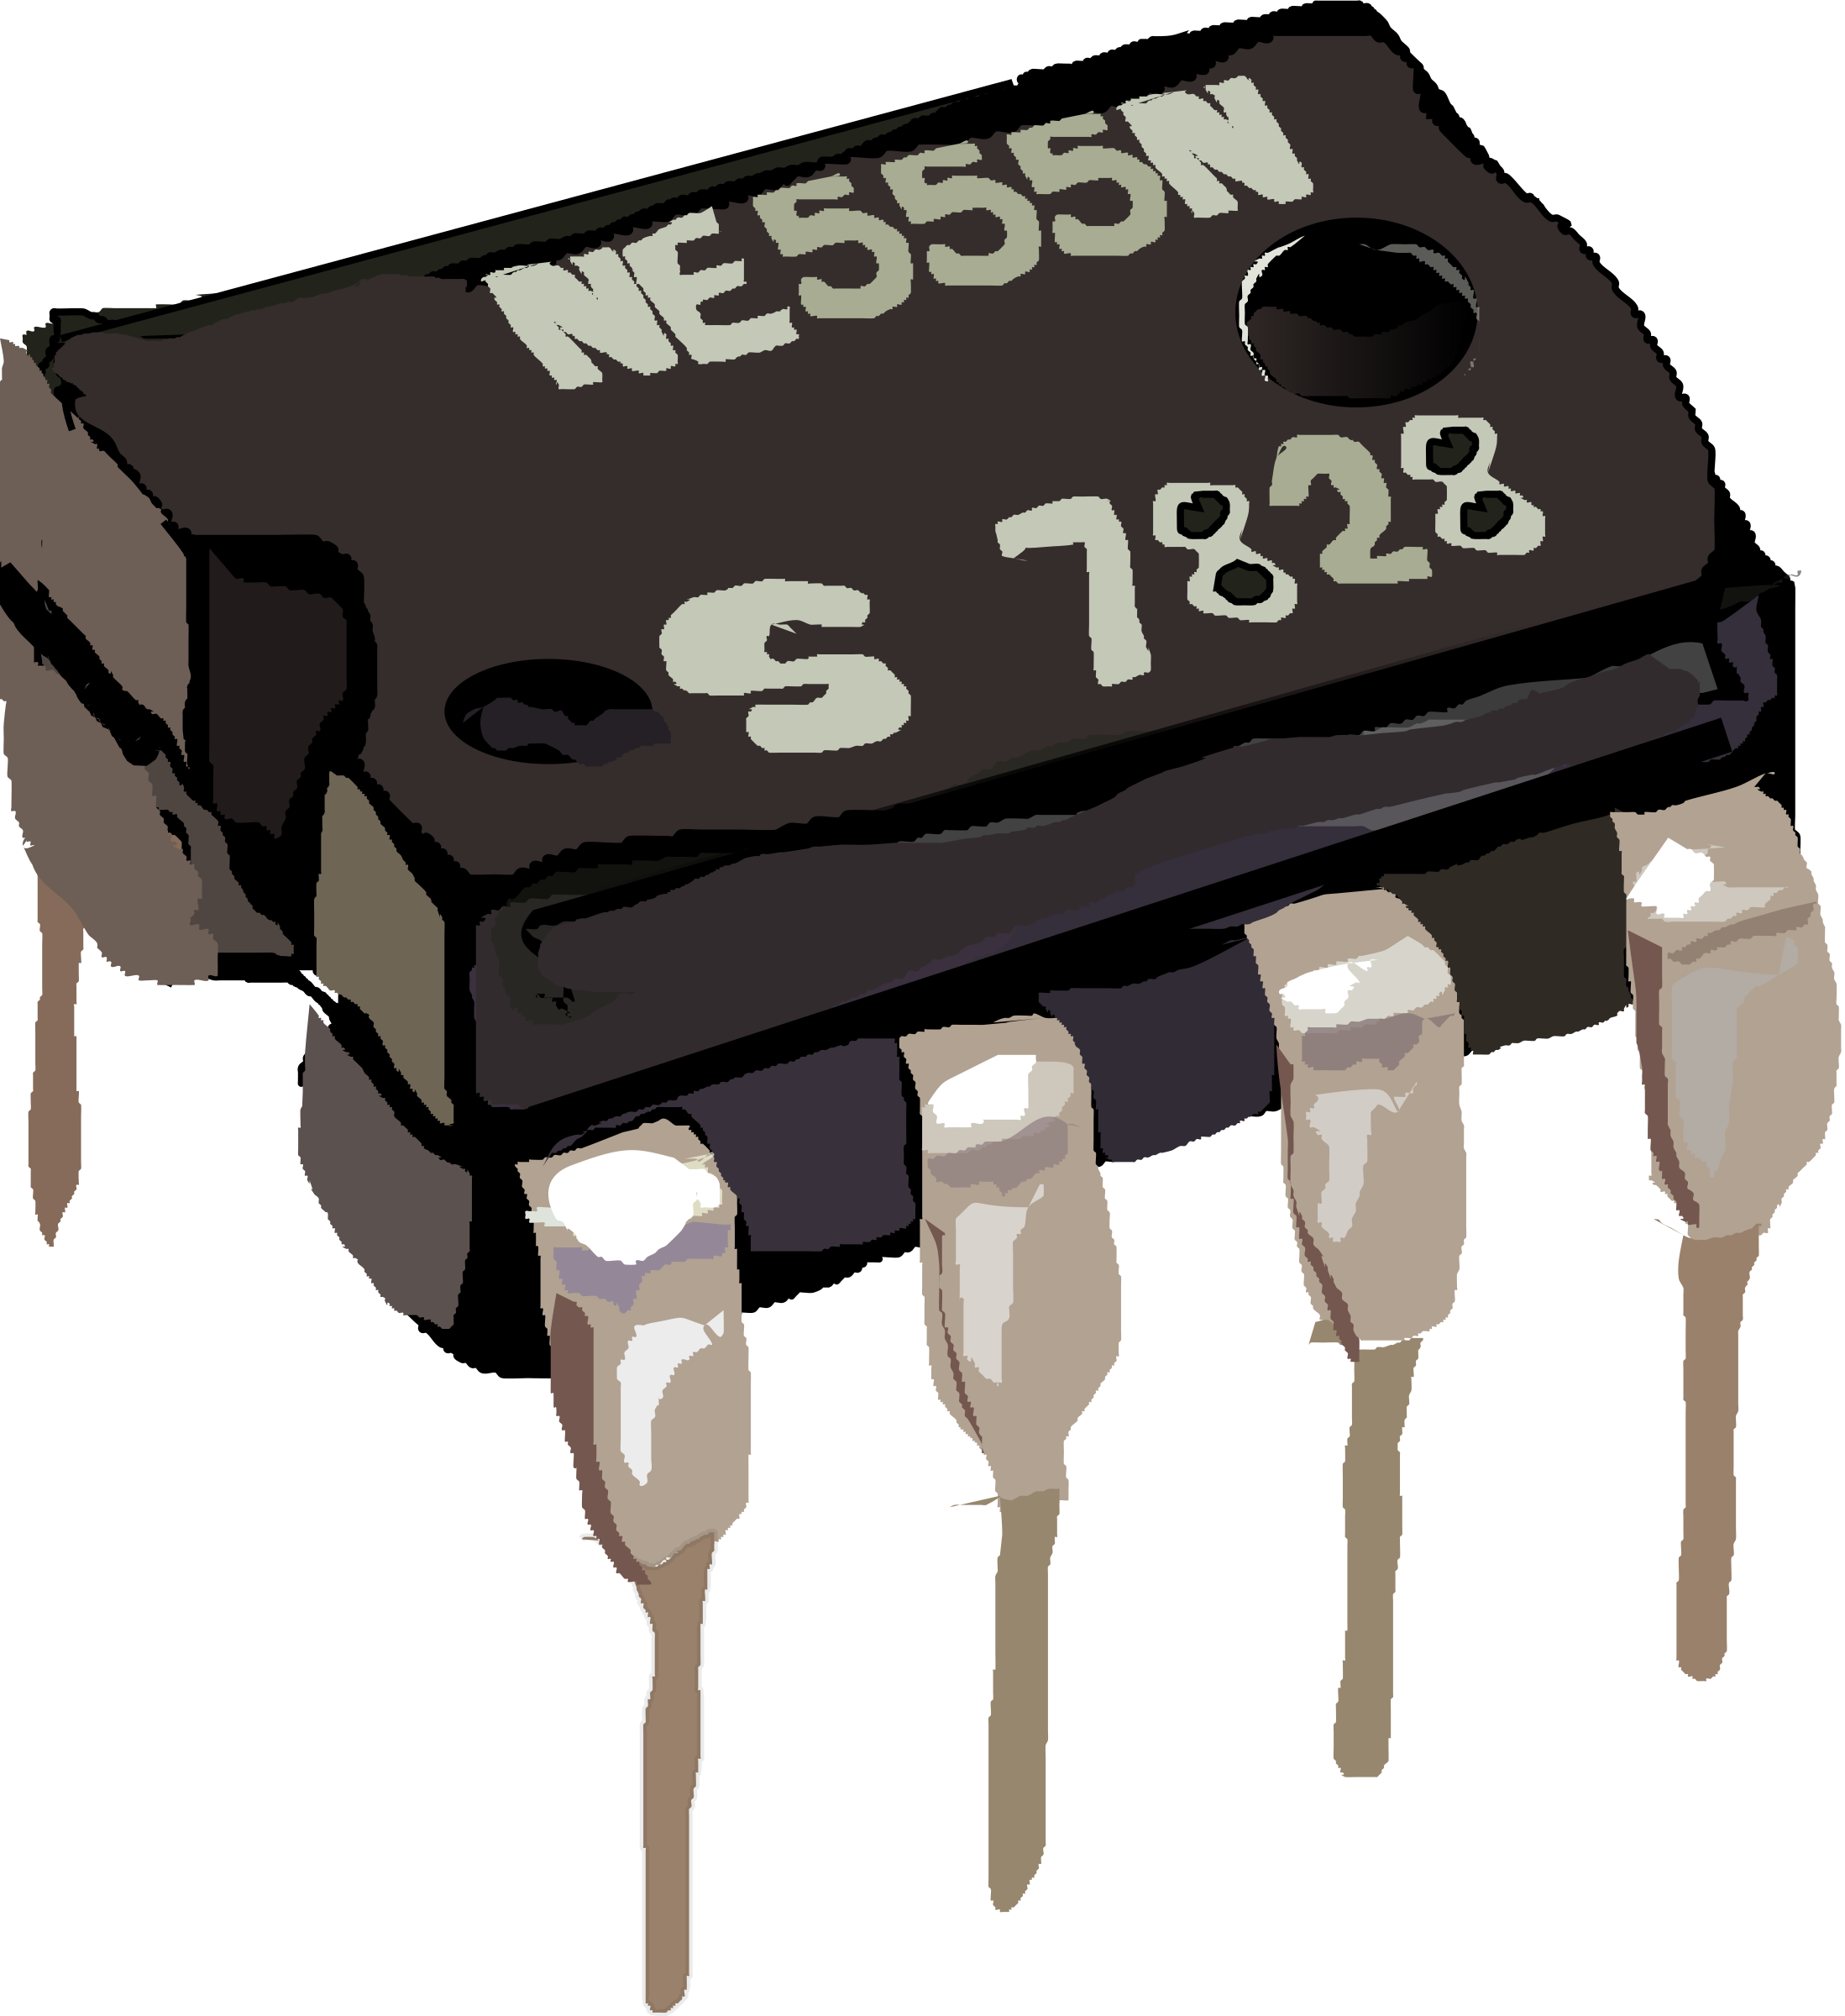 clipart-555-timer-ic